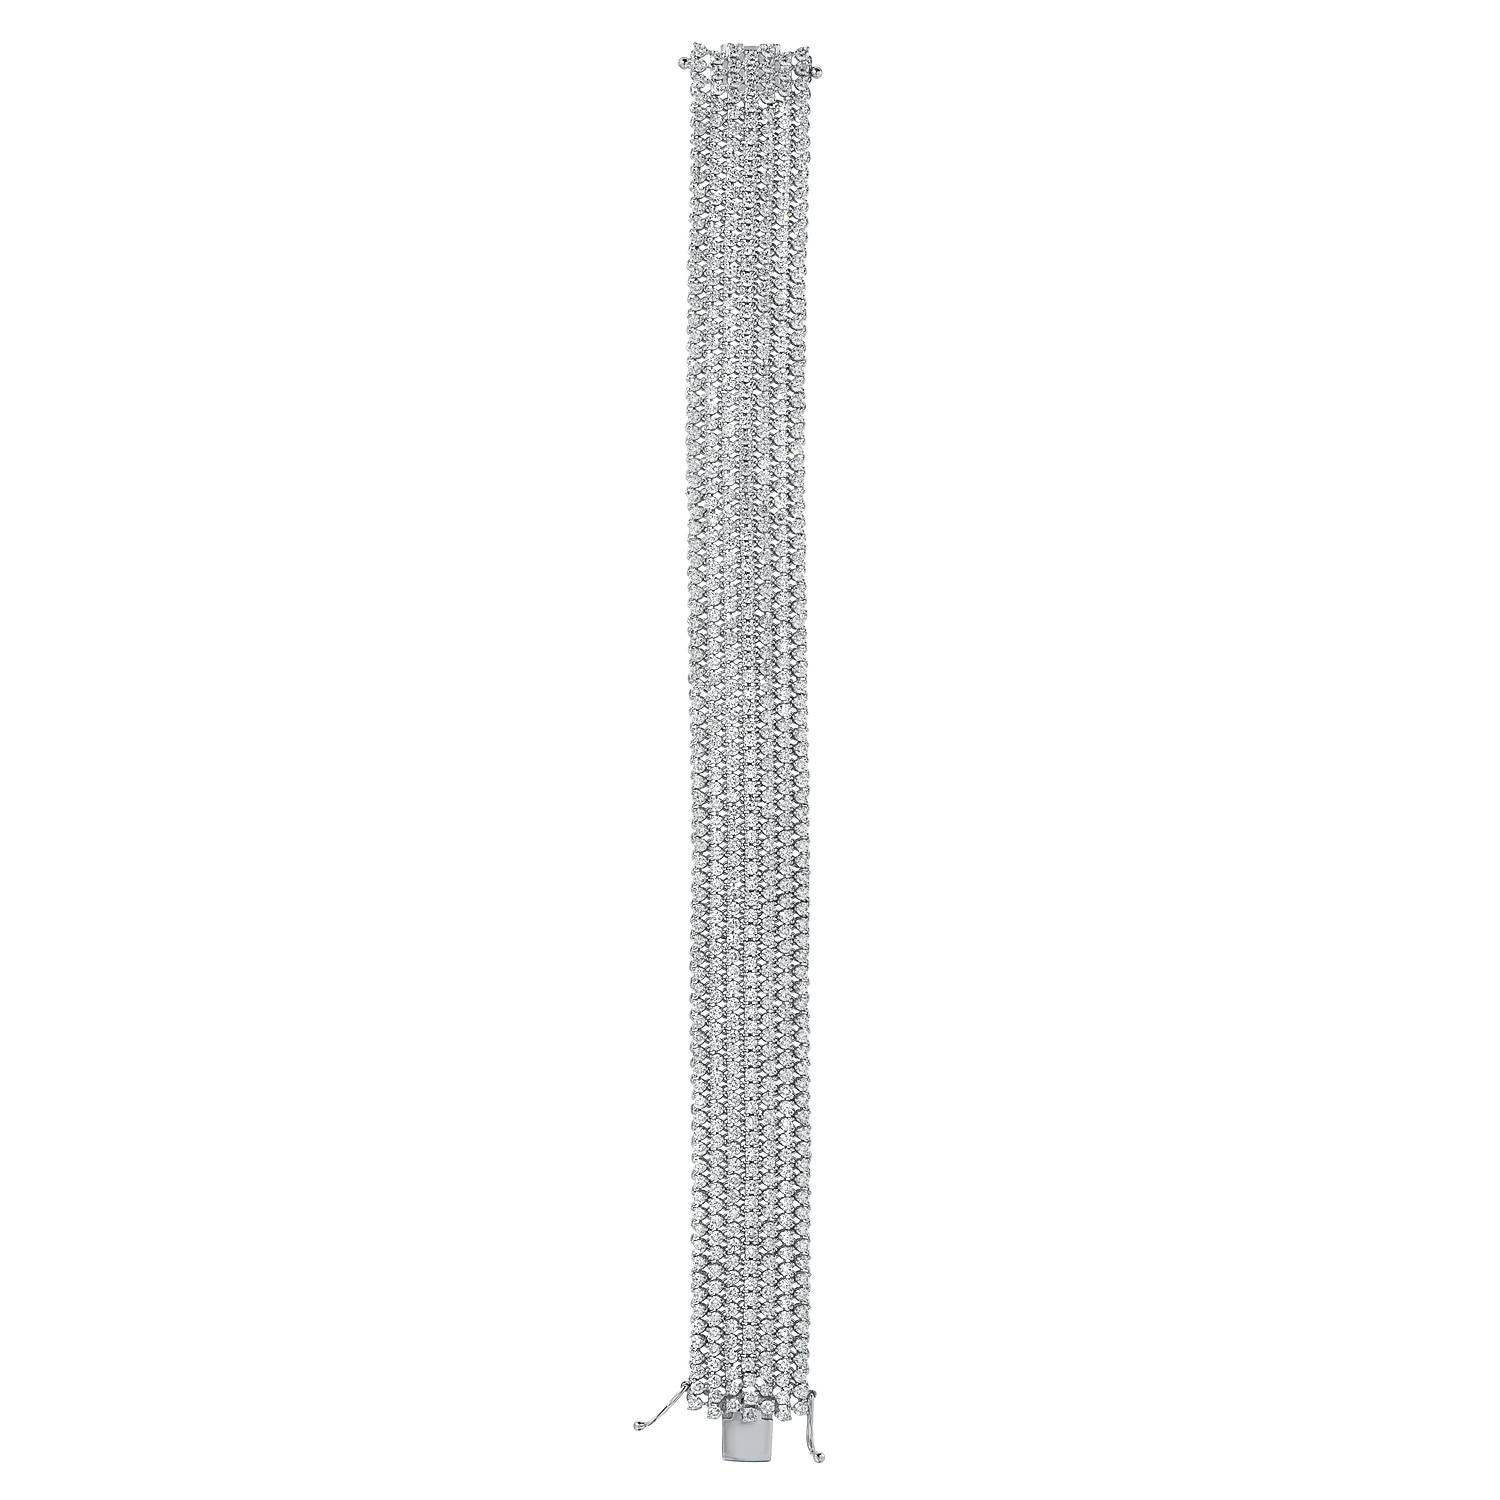 Diamond bracelet comprised of 602 round brilliant diamonds weighing a total of 13.08 carats, remarkably hand set in this 18K white gold, completely flexible, mesh diamond bracelet.
Diamond bracelet total length - 7 inches.
Diamond bracelet total